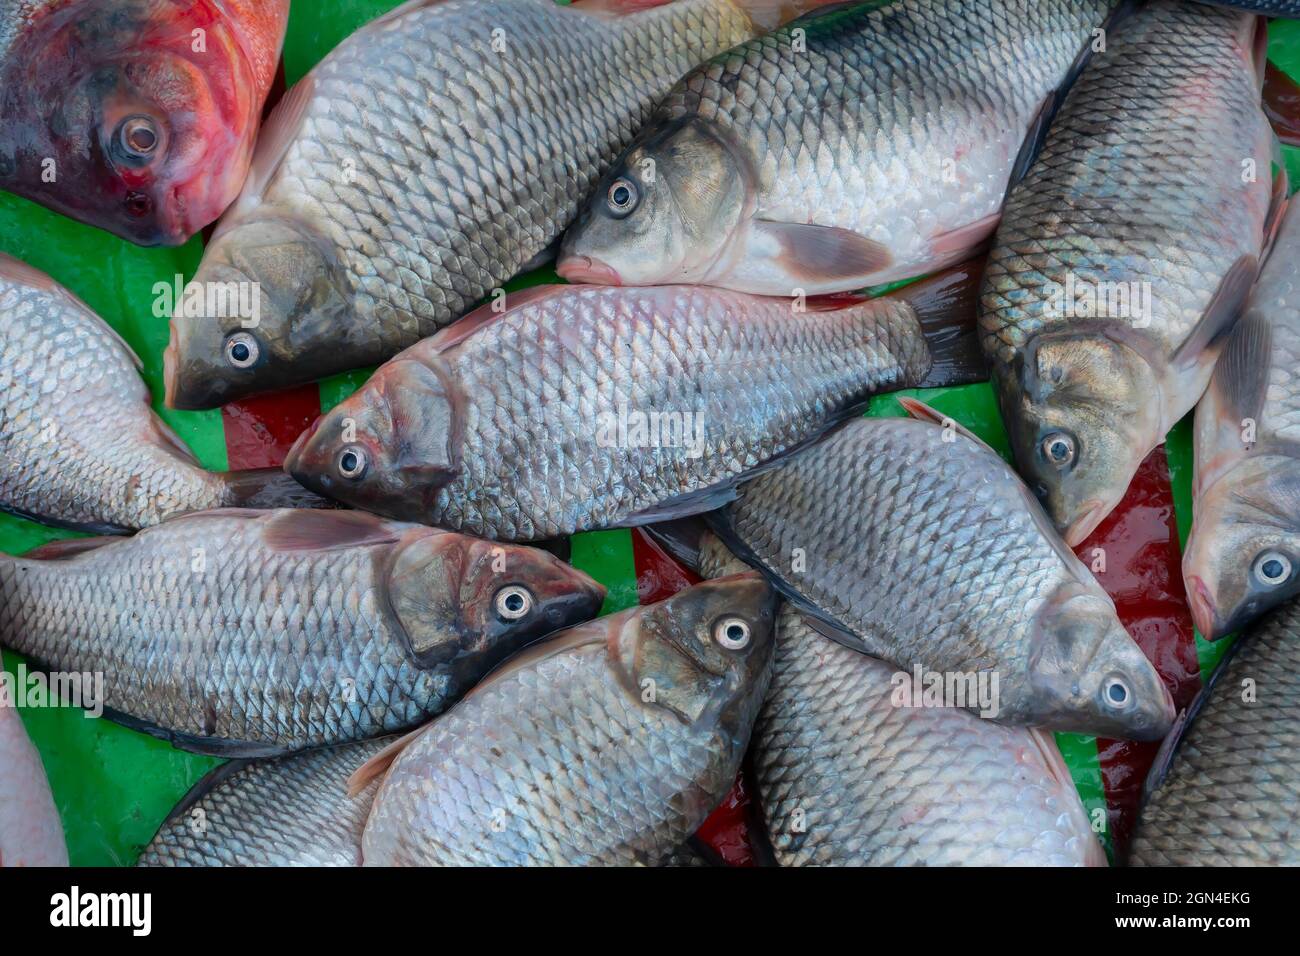 Bhetki or barramundi (Lates calcarifer) or Asian sea bass, is a popular fish among Bengali people, served in festivities like marriages and important Stock Photo